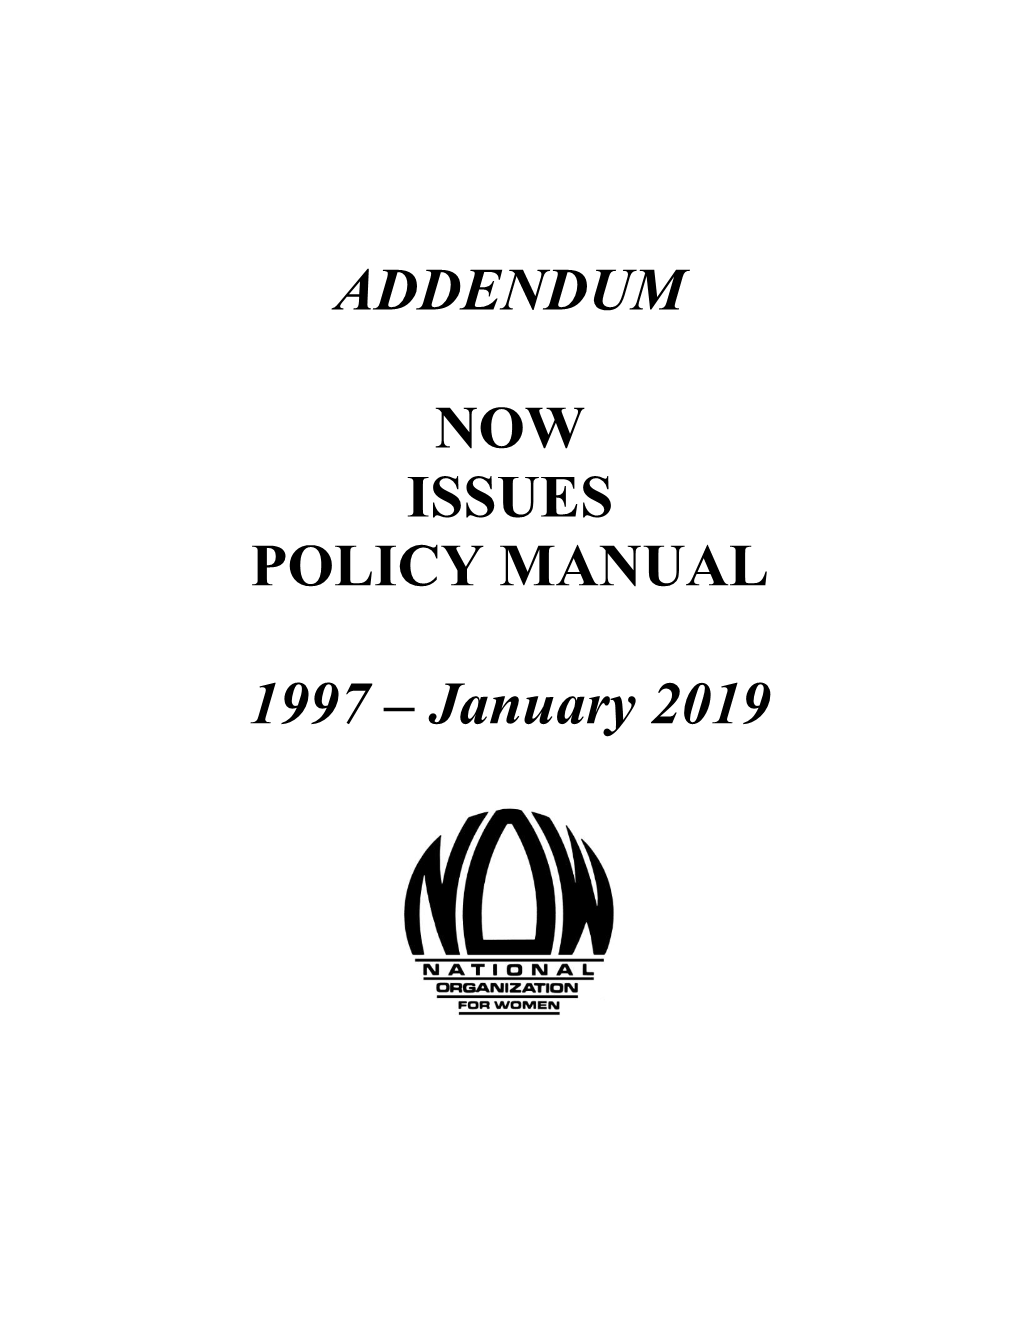 ADDENDUM NOW ISSUES POLICY MANUAL 1997 – January 2019